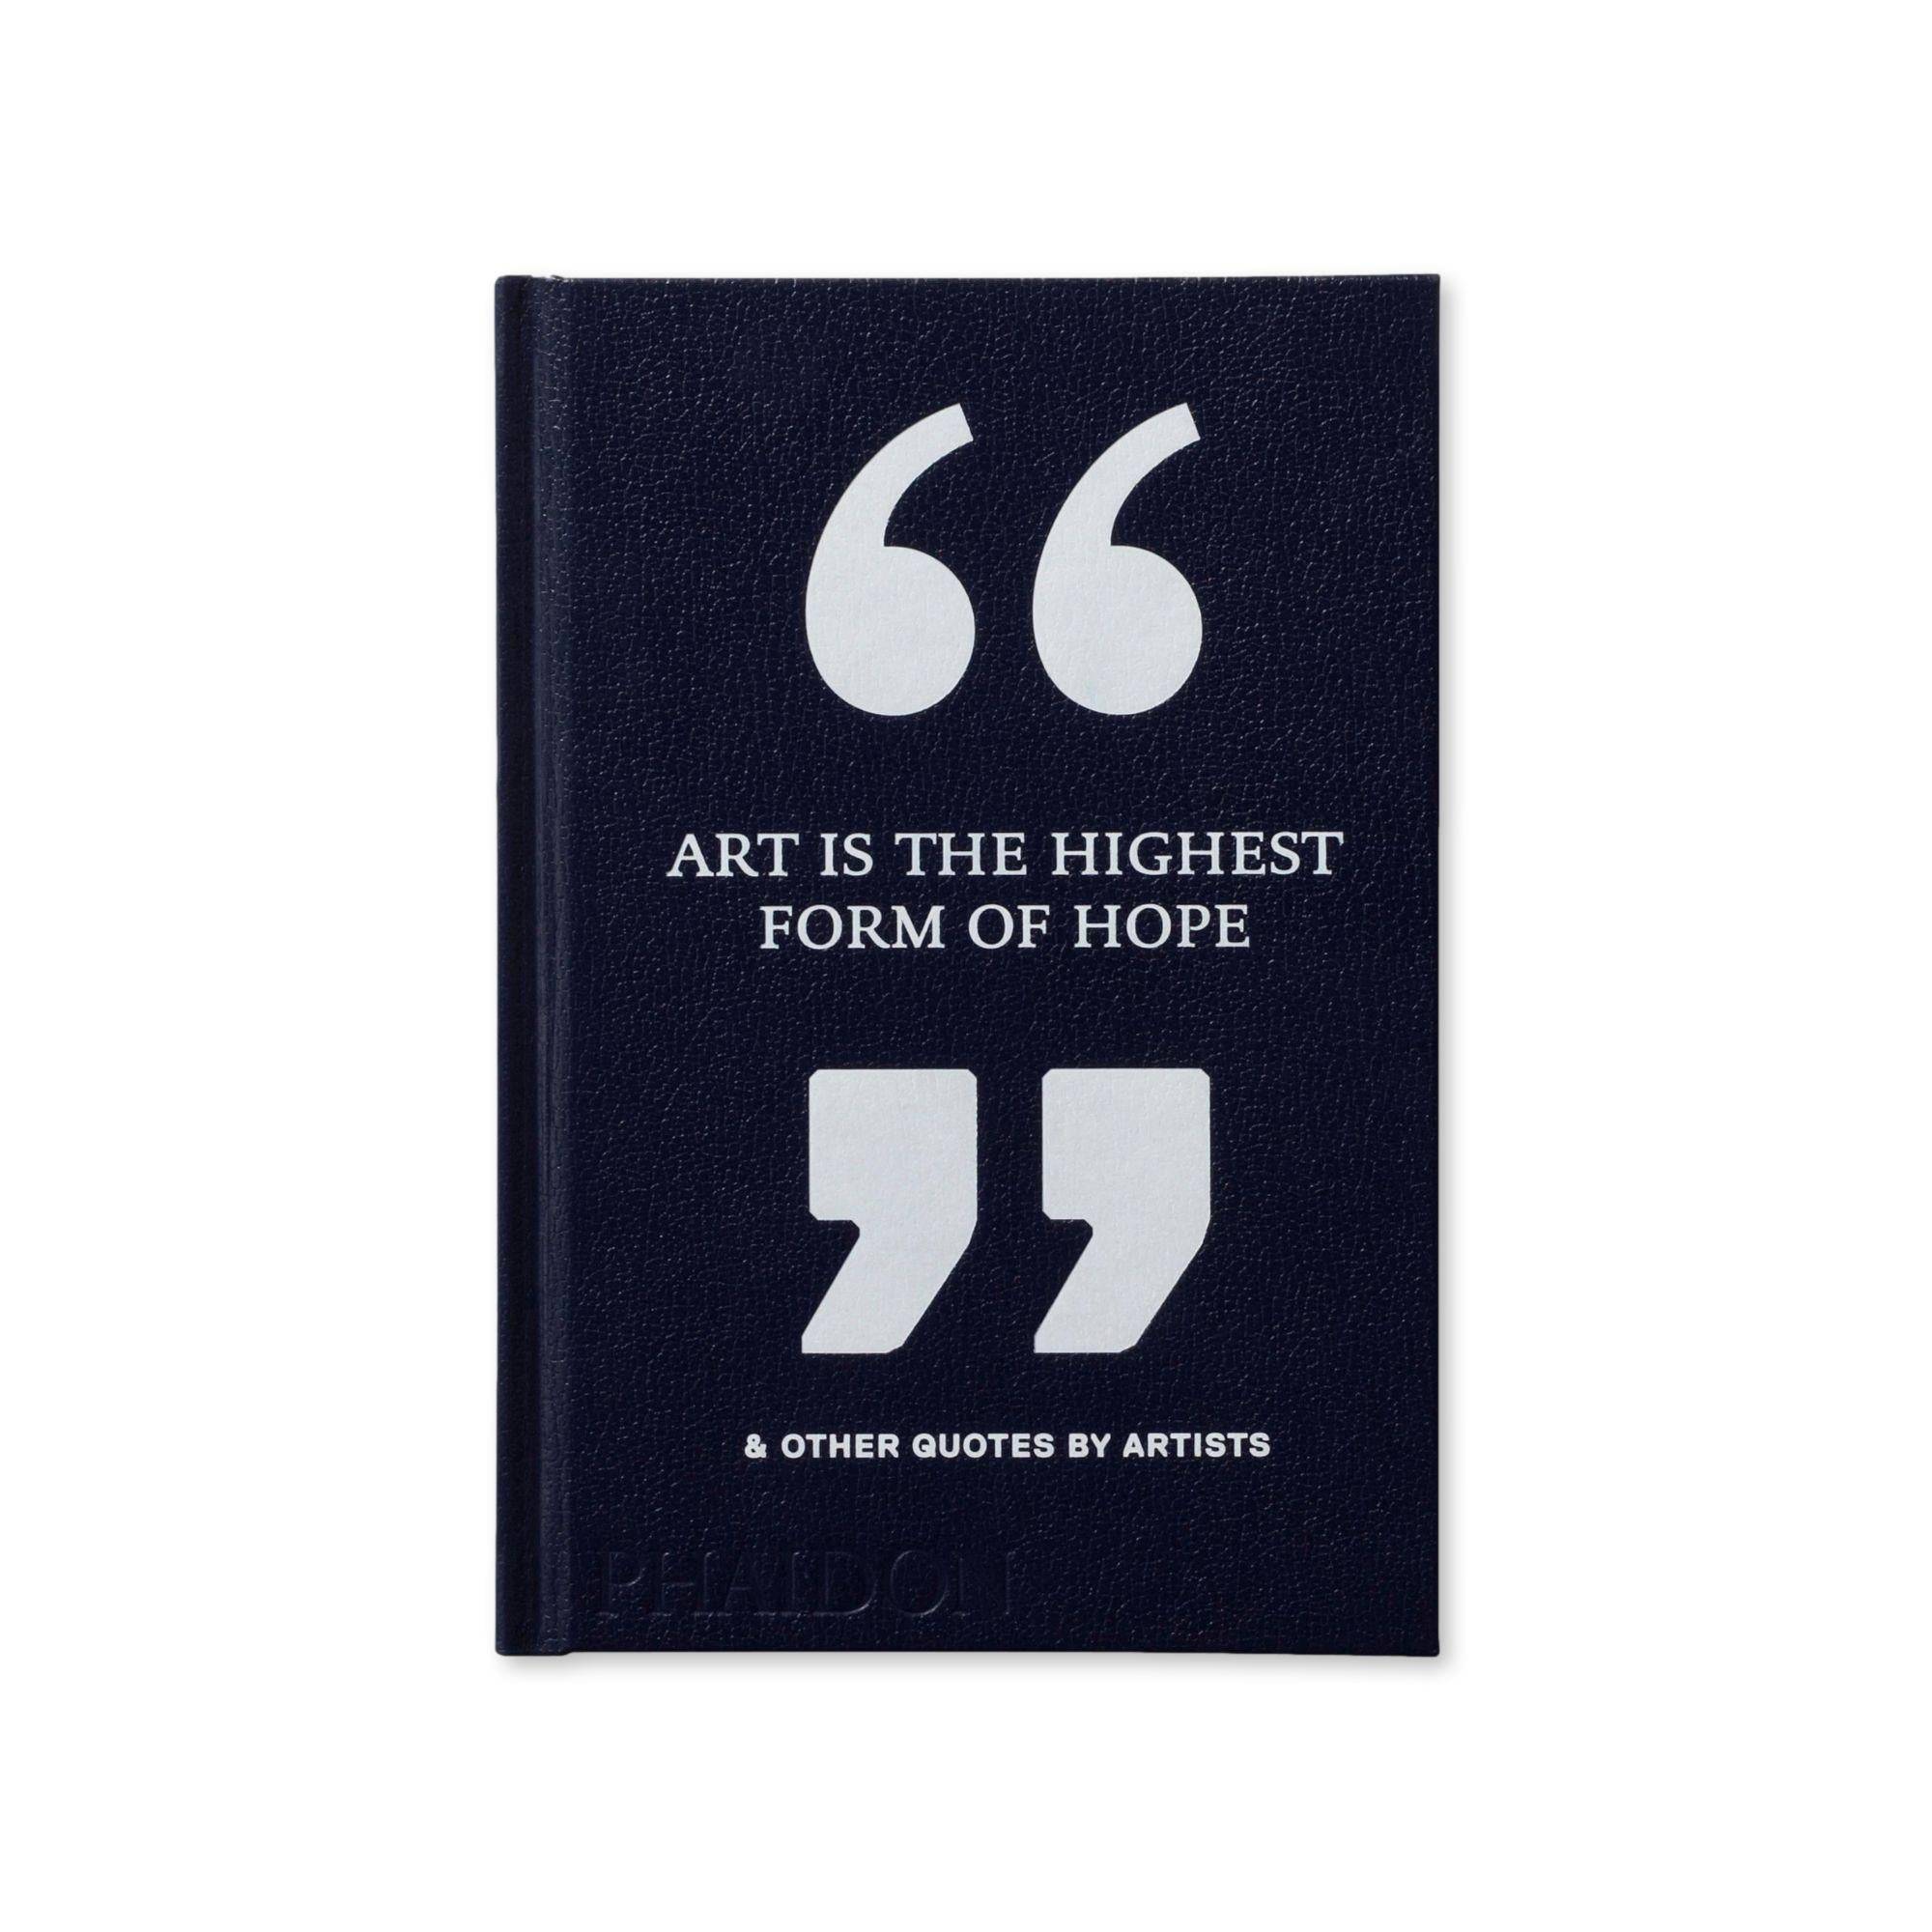 Art Is the Highest Form of Hope & Other Quotes by Artists - THAT COOL LIVING